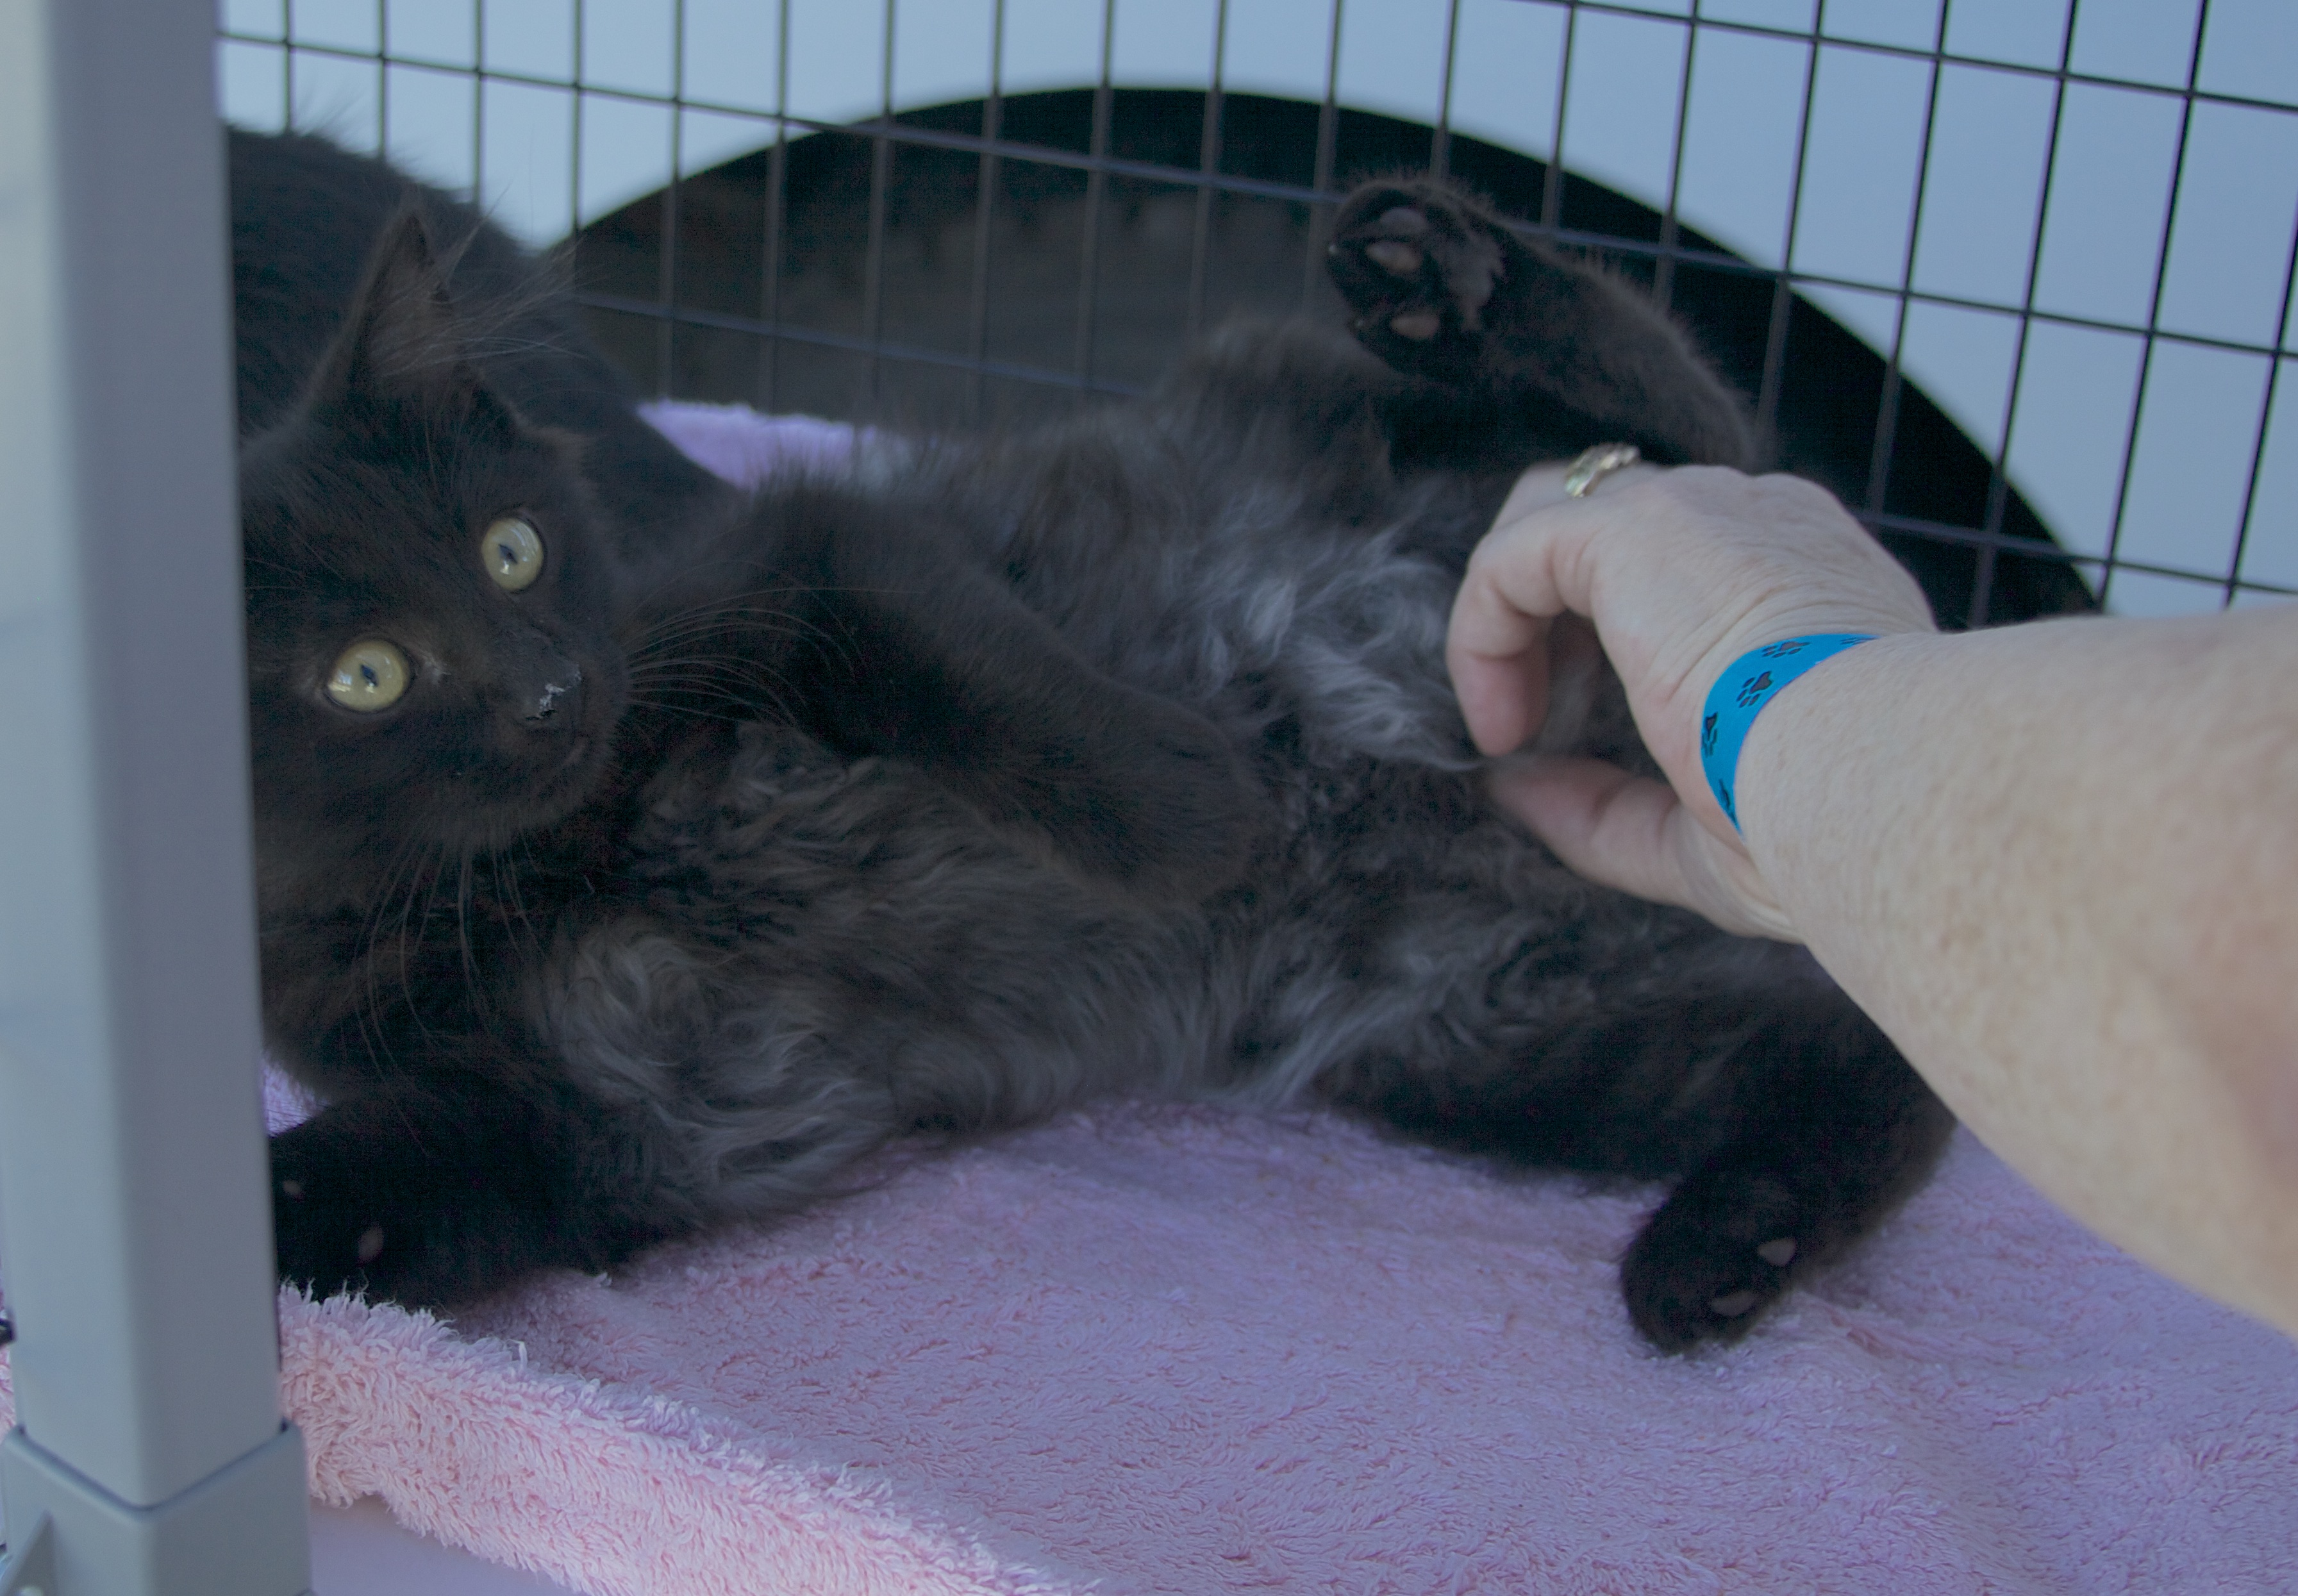 Woman Rubbing The Tummy Of A Black Kitten In A Cage